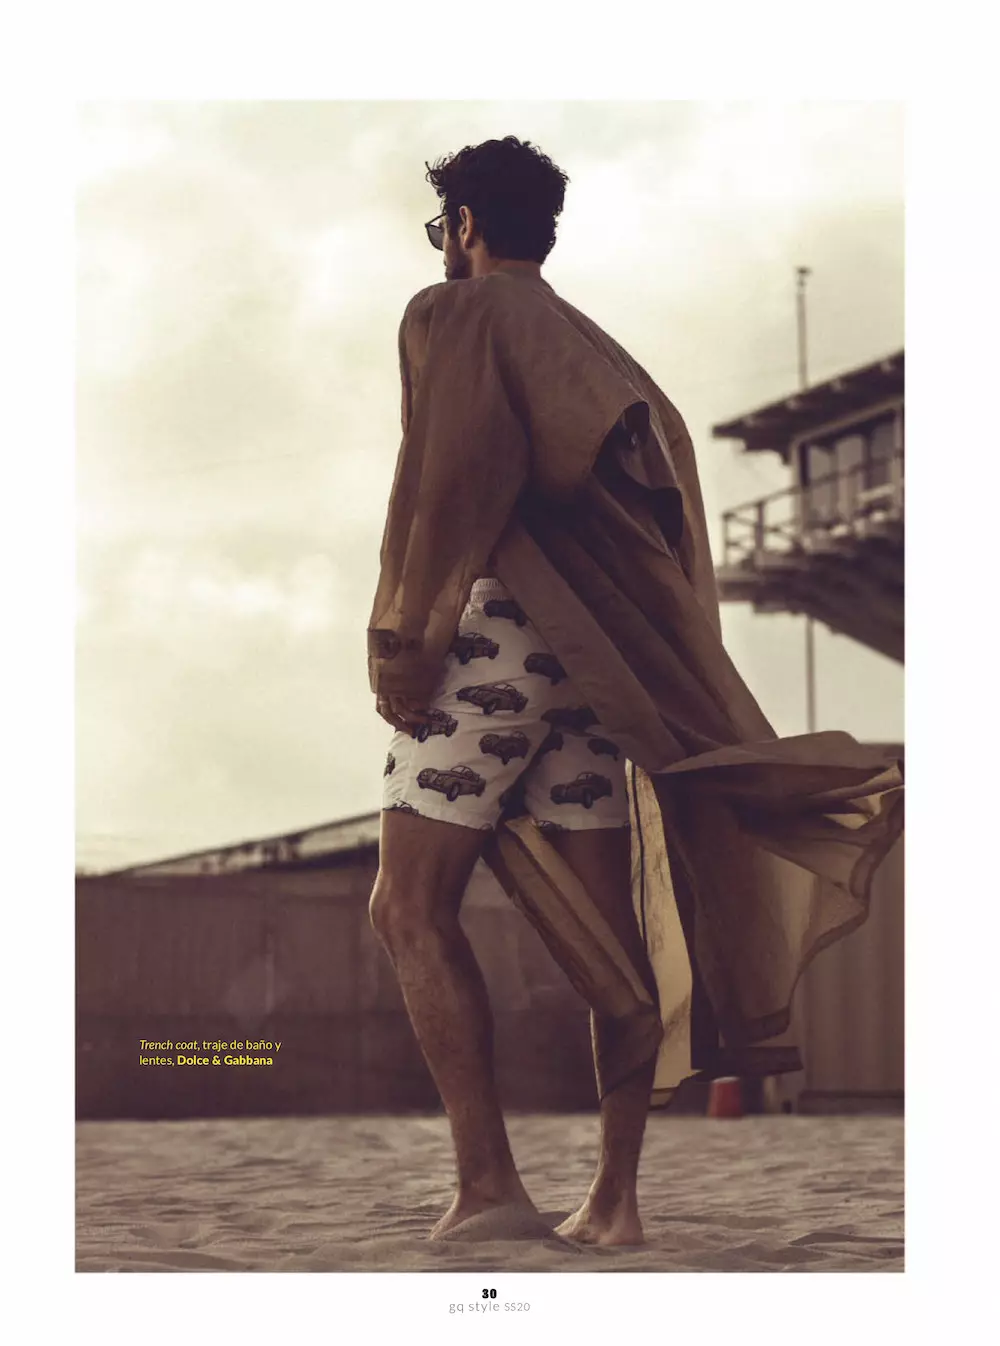 Noah Mills af Richard Ramos for GQ Style Mexico SS20 Editorial